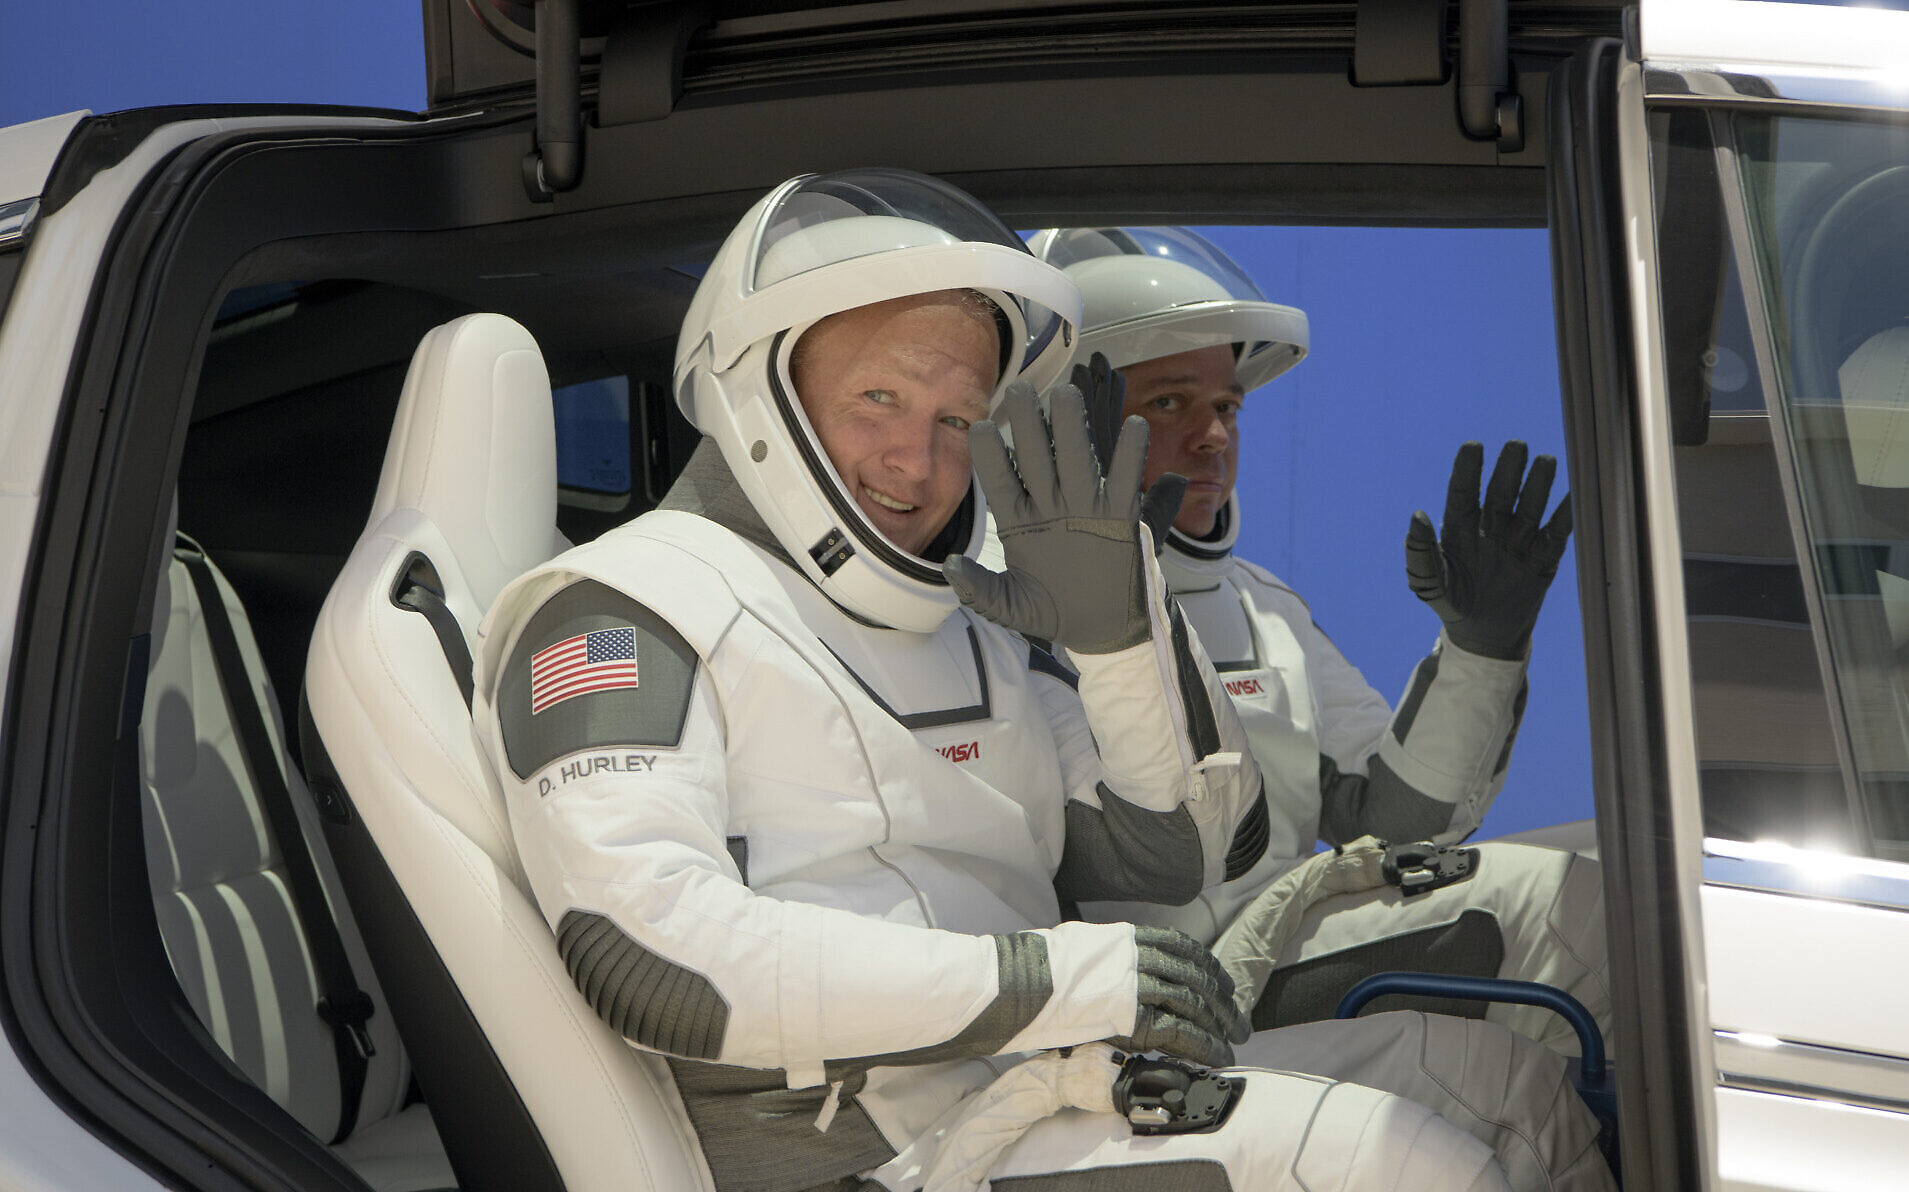 Musk's SpaceX prepares for upcoming astronaut mission, renewing NASA's crewed launch program